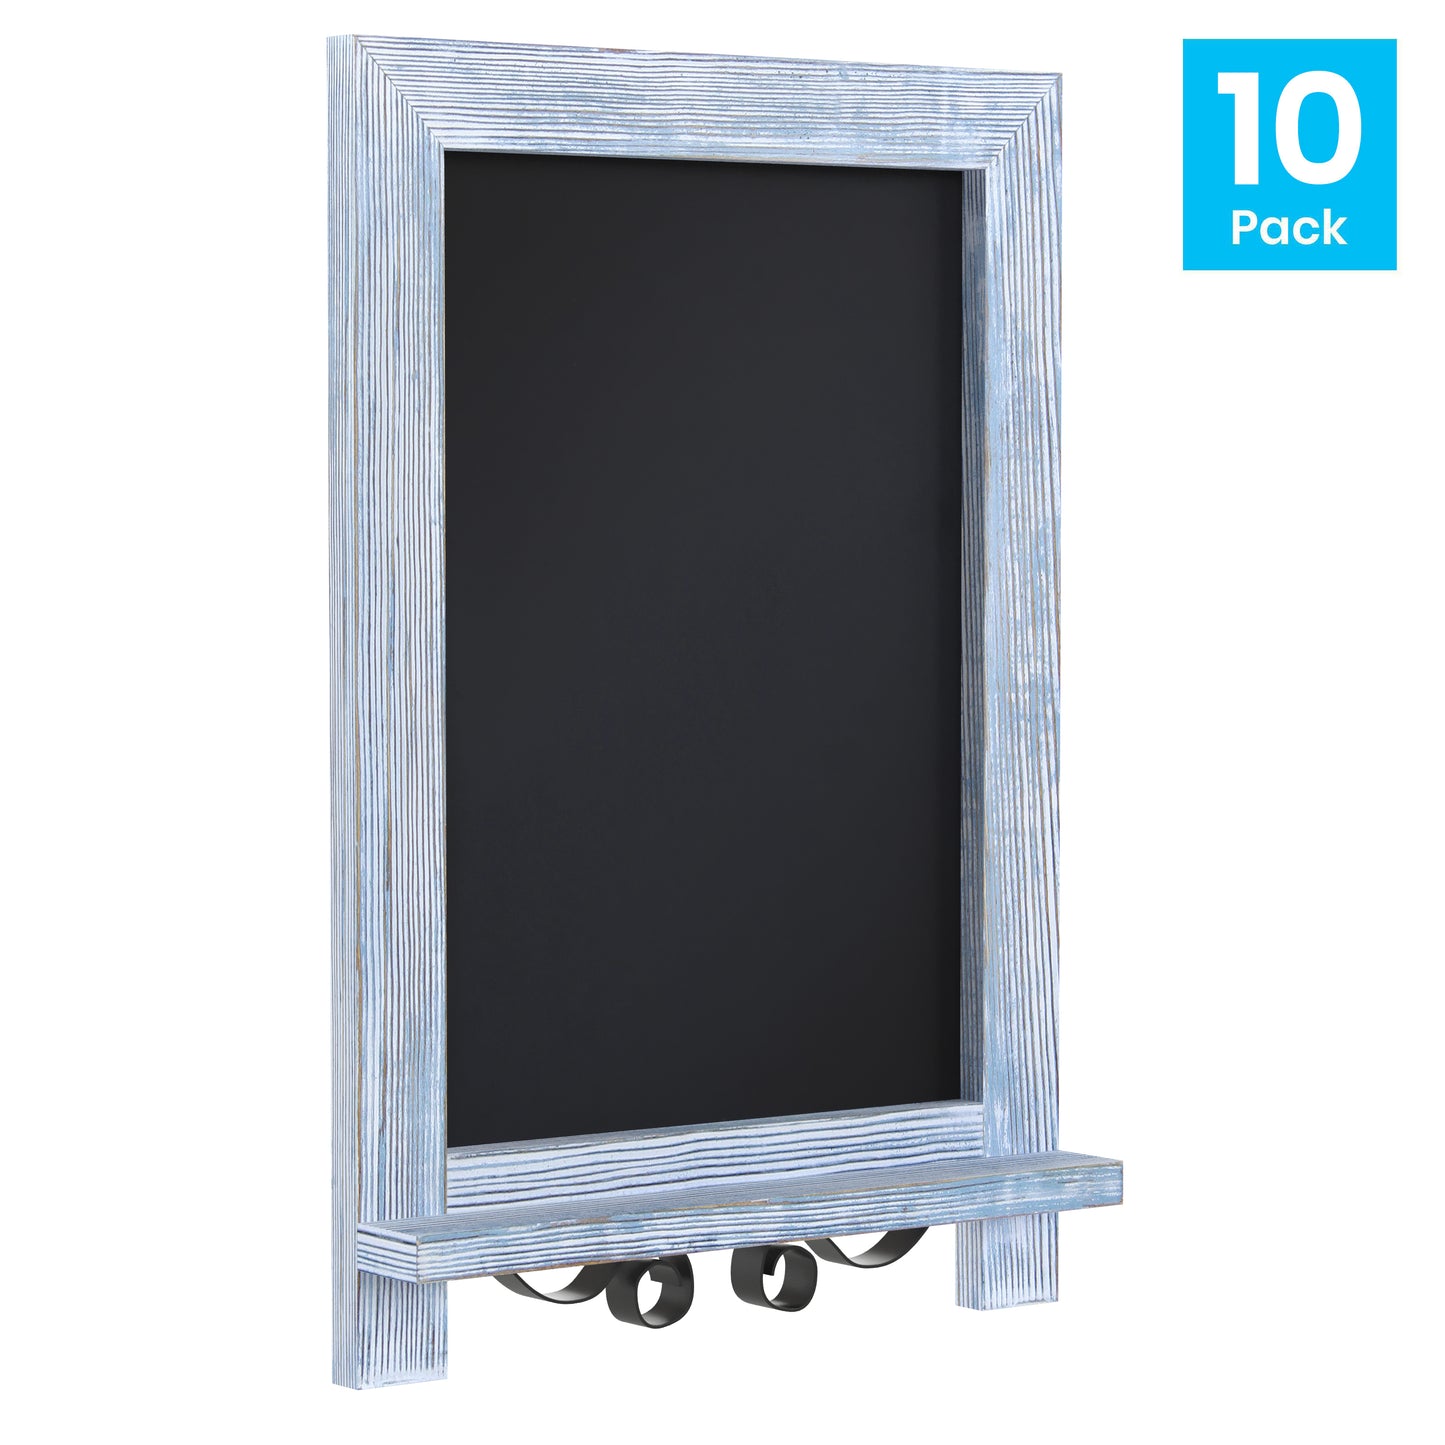 10PK Rustic Blue Chalkboards 10-HFKHD-GDIS-CRE8-912315-GG